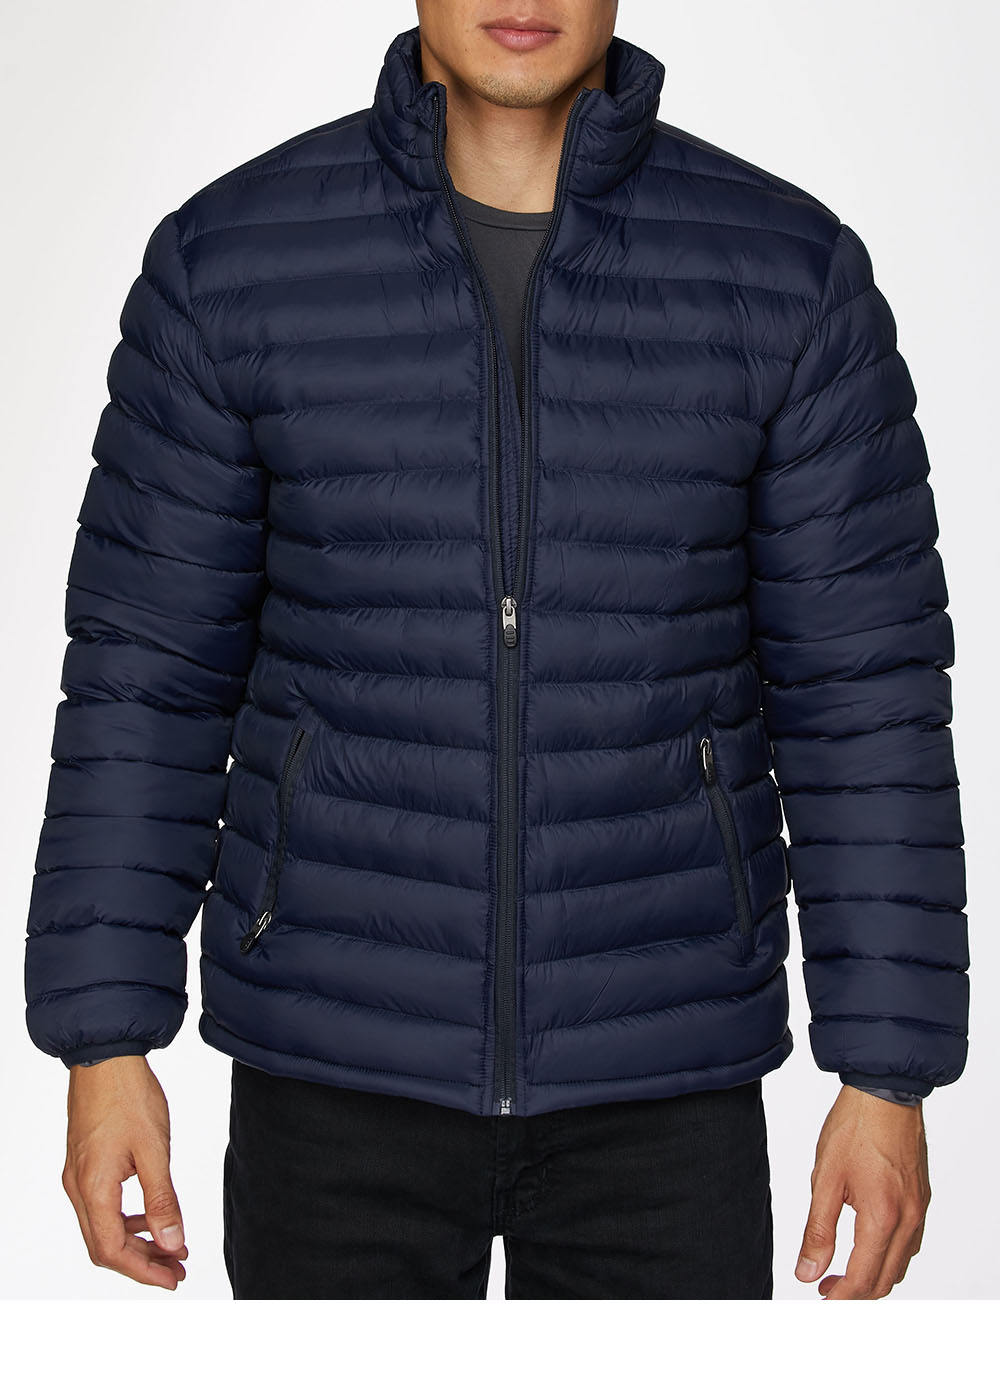  Men's High-Quality Nylon Quilted Jacket With Contrast Lining-Navy